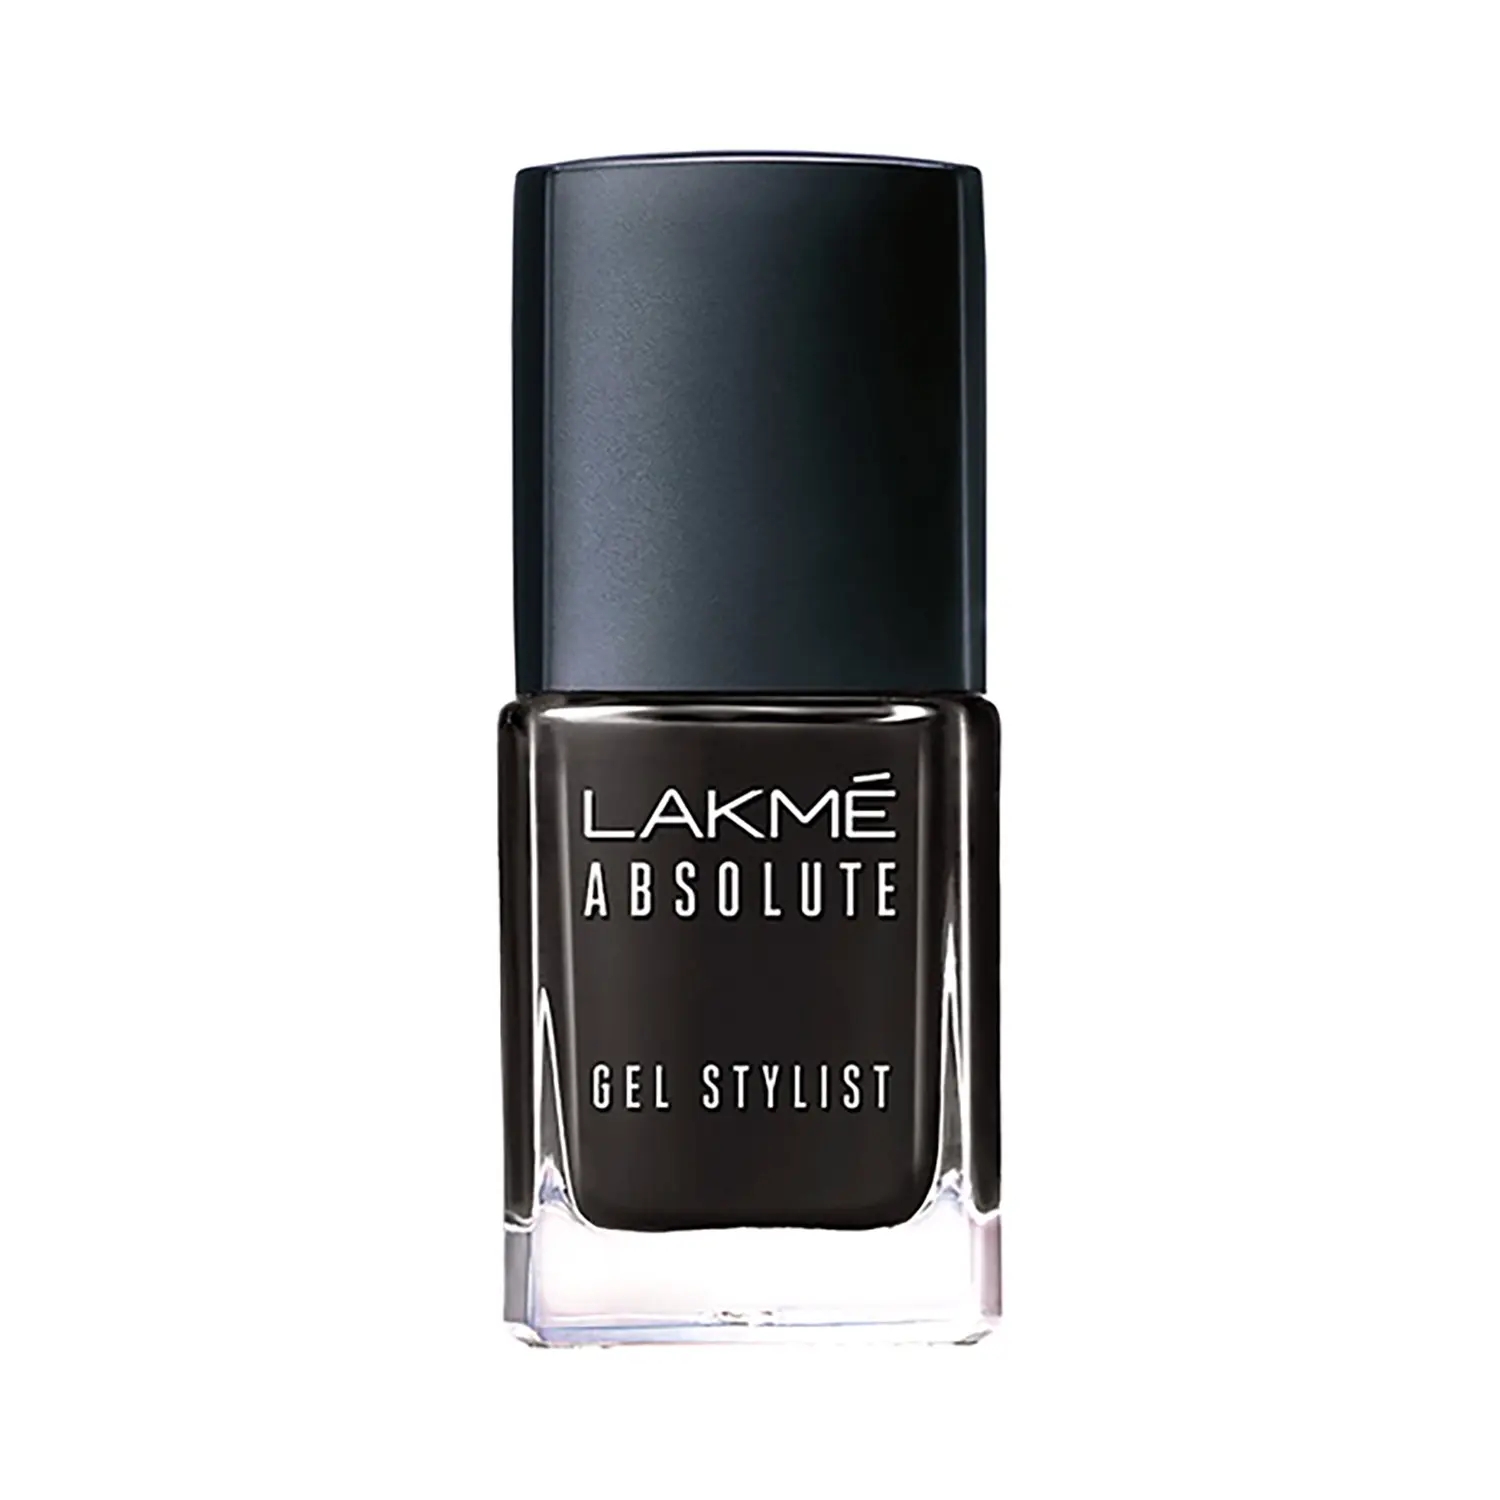 Lakme Soft Rose Nail Polish Price Starting From Rs 243 | Find Verified  Sellers at Justdial